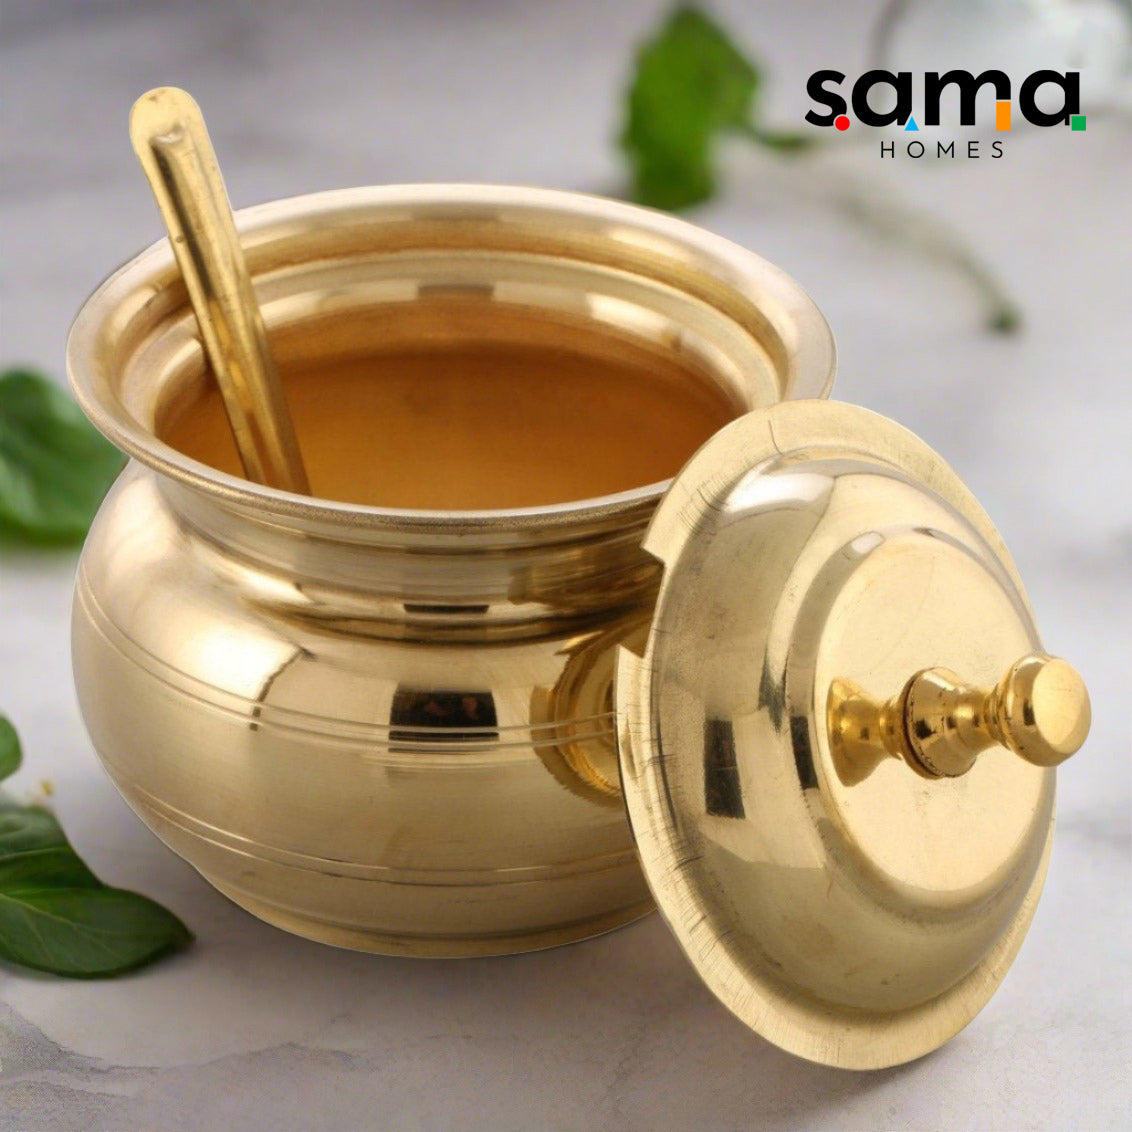 Sama Homes - Brass Ghee Pot With Lid and a Spoon